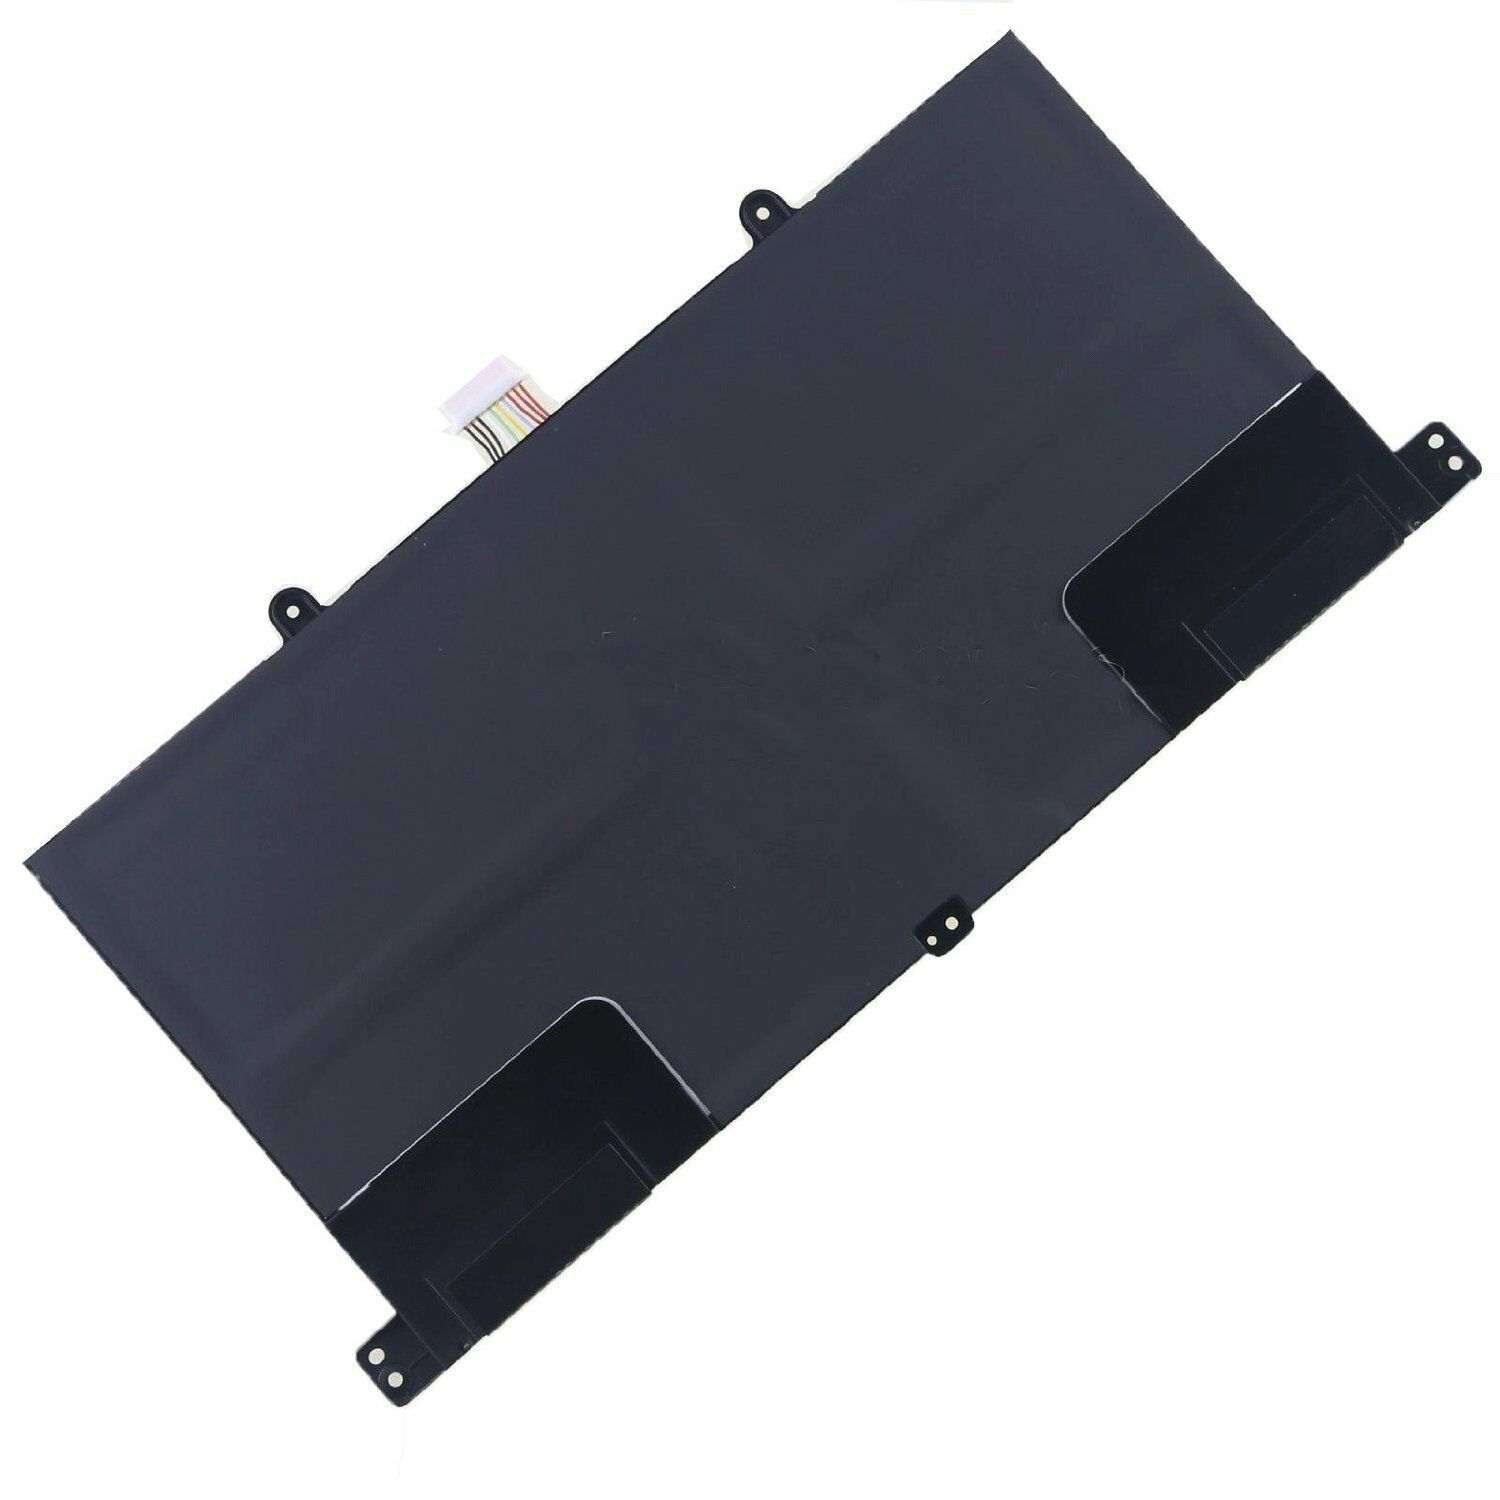 28Wh 7WMM7 Battery For Dell Venue 11 Pro Keyboard Dock D1R74 CFC6C D1R74 7.4V